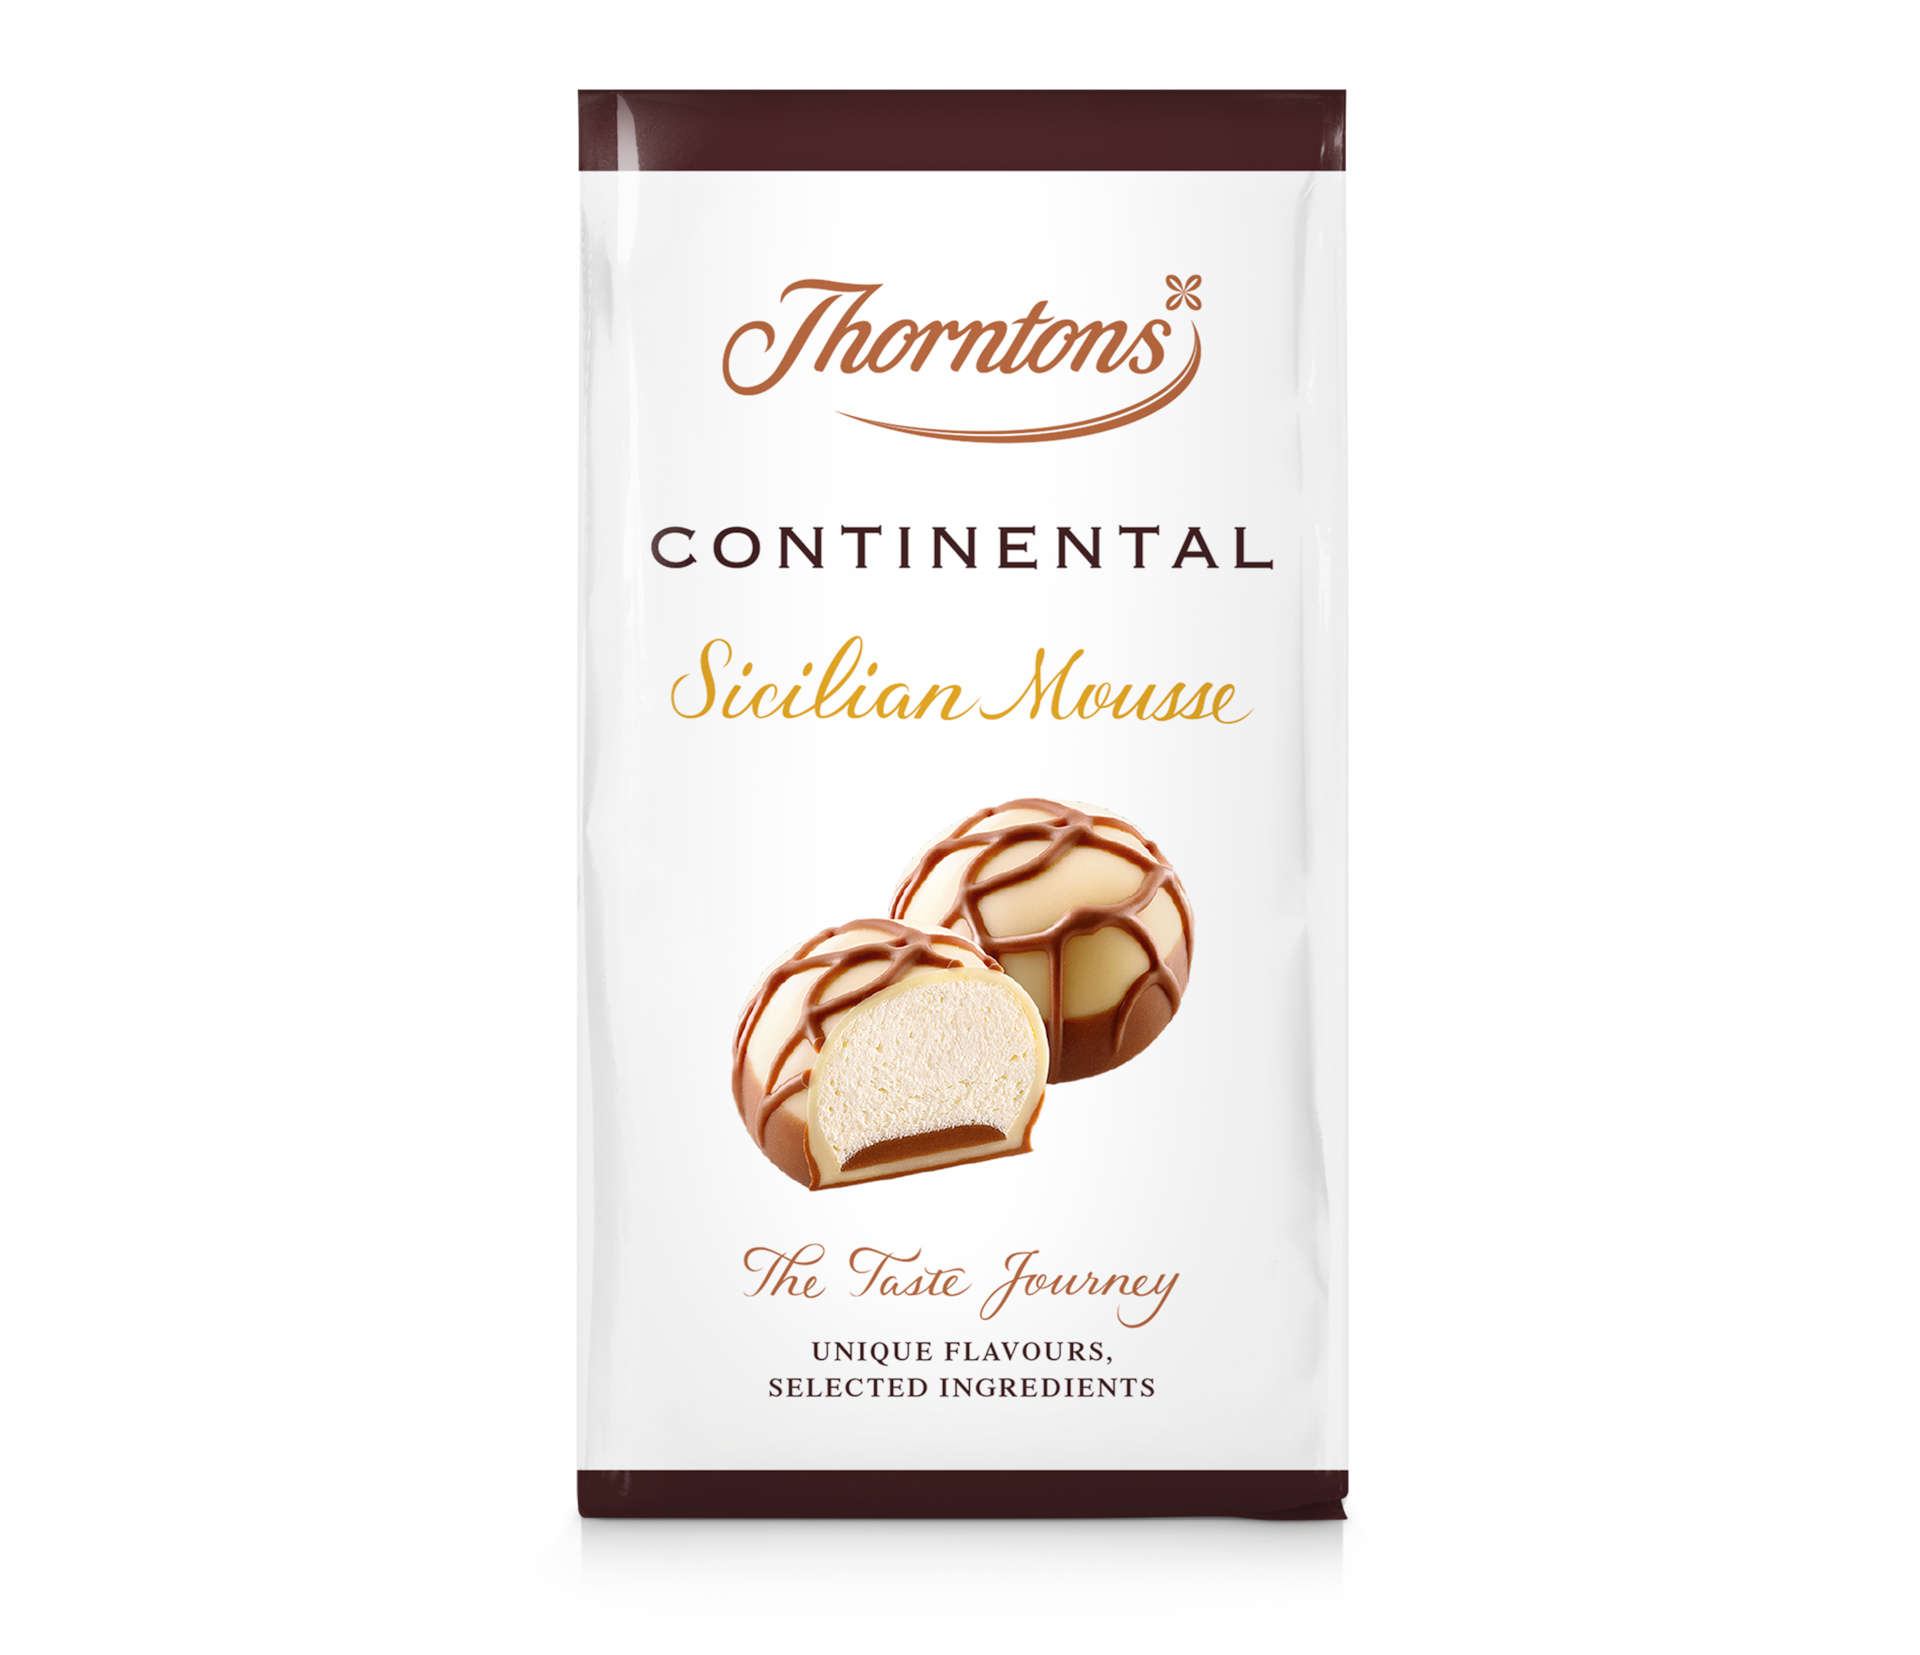 https://www.thorntons.com/medias/sys_master/images/hb7/hcd/8916763705374/77177424_main/77177424-main.png?resize=ProductGridComponent